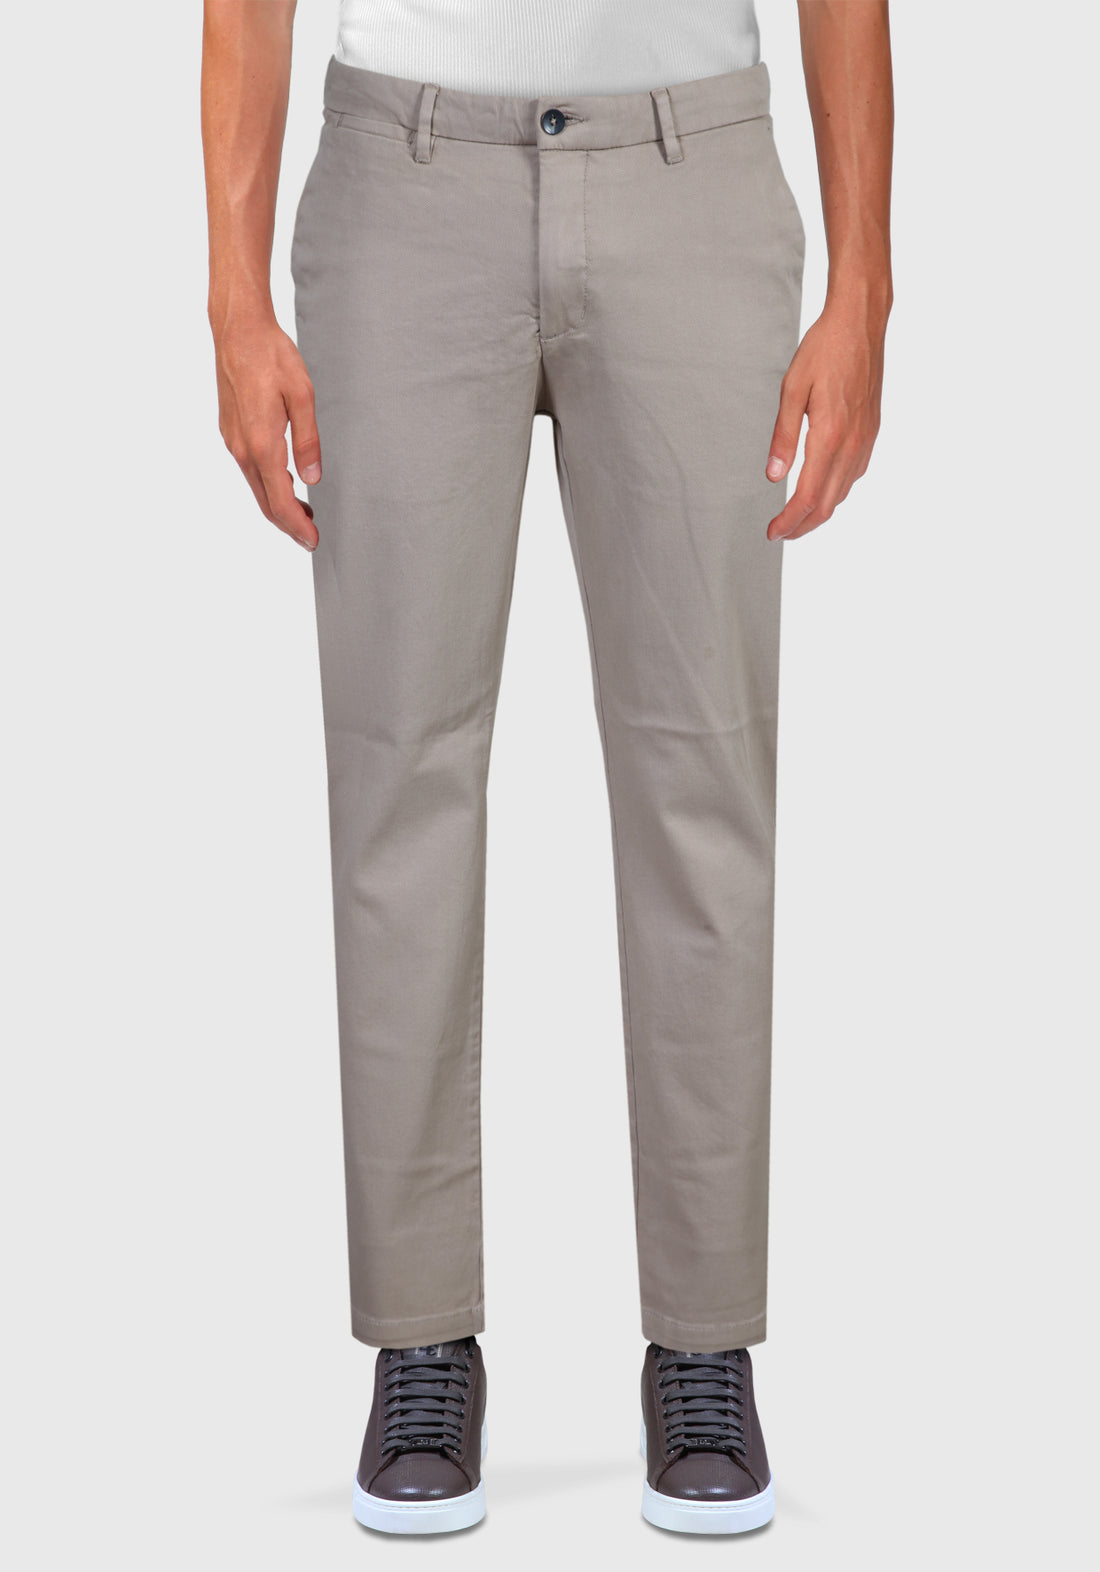 America Pocket Trousers in Warm Woven Cotton - Sand